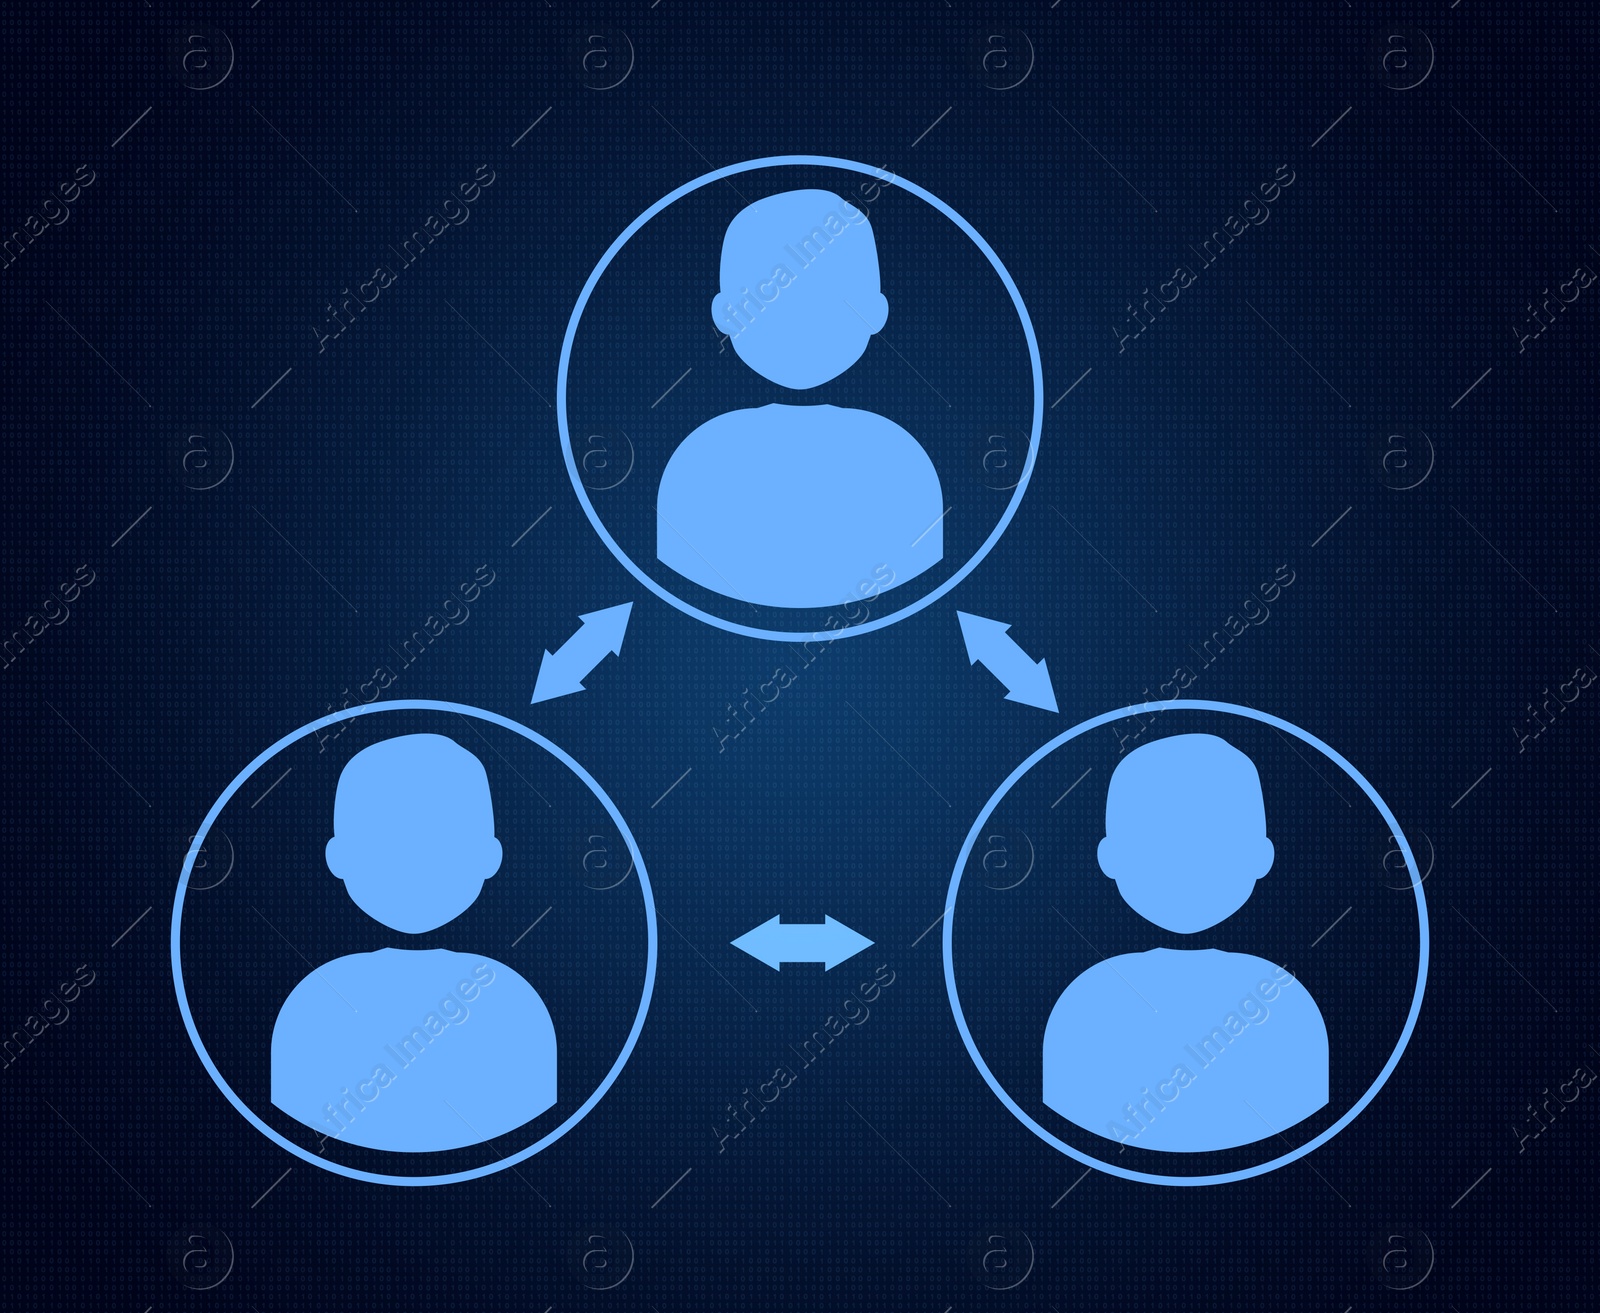 Illustration of Human icons connected with double arrows on dark blue background, illustration. Multi-user system